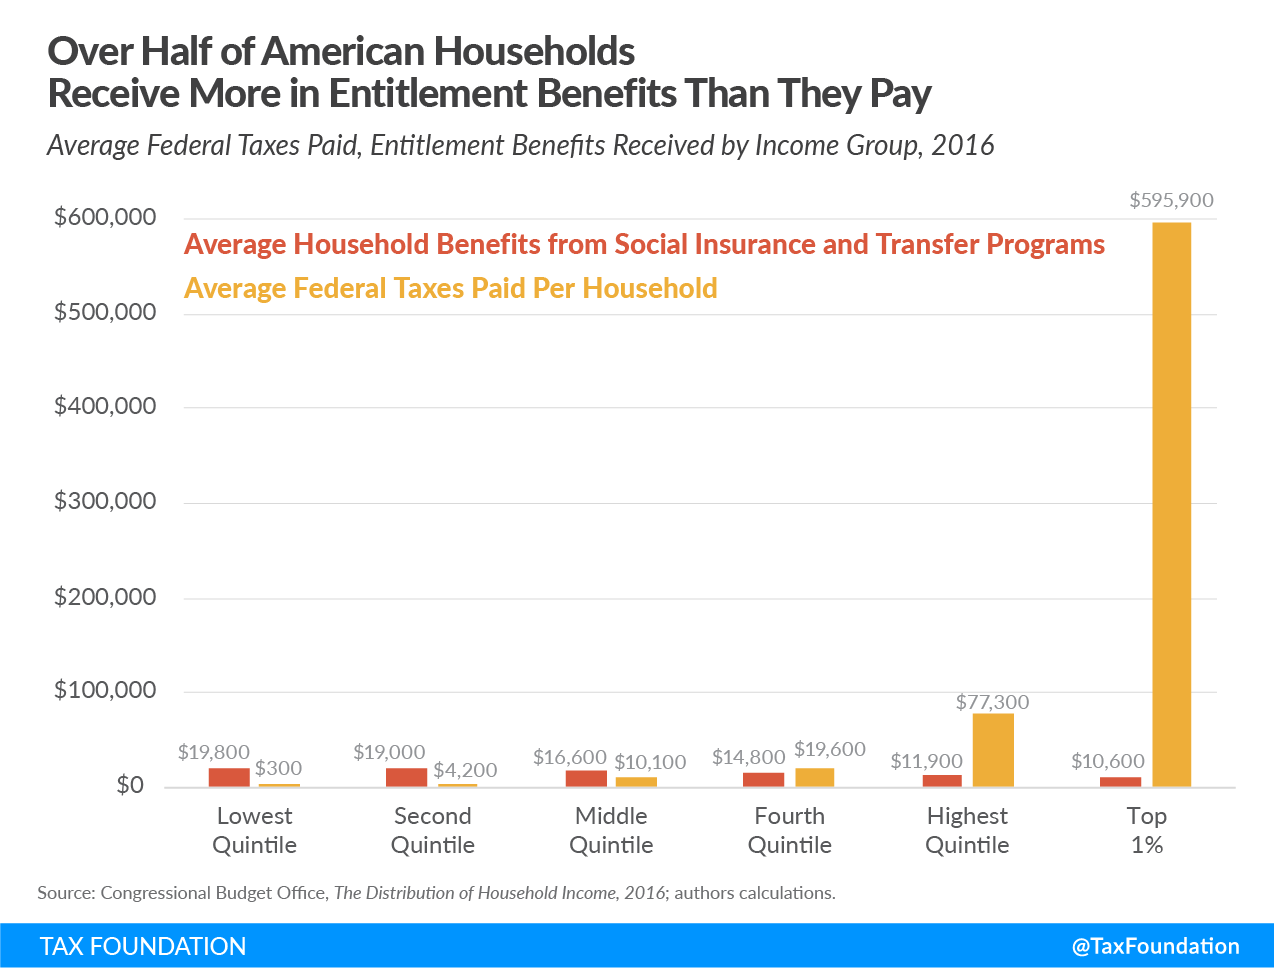 What would income equality look like? Comparing average federal taxes paid to entitlement benefits received by income group, income inequality debate by Elizabeth Warren and Bernie Sanders